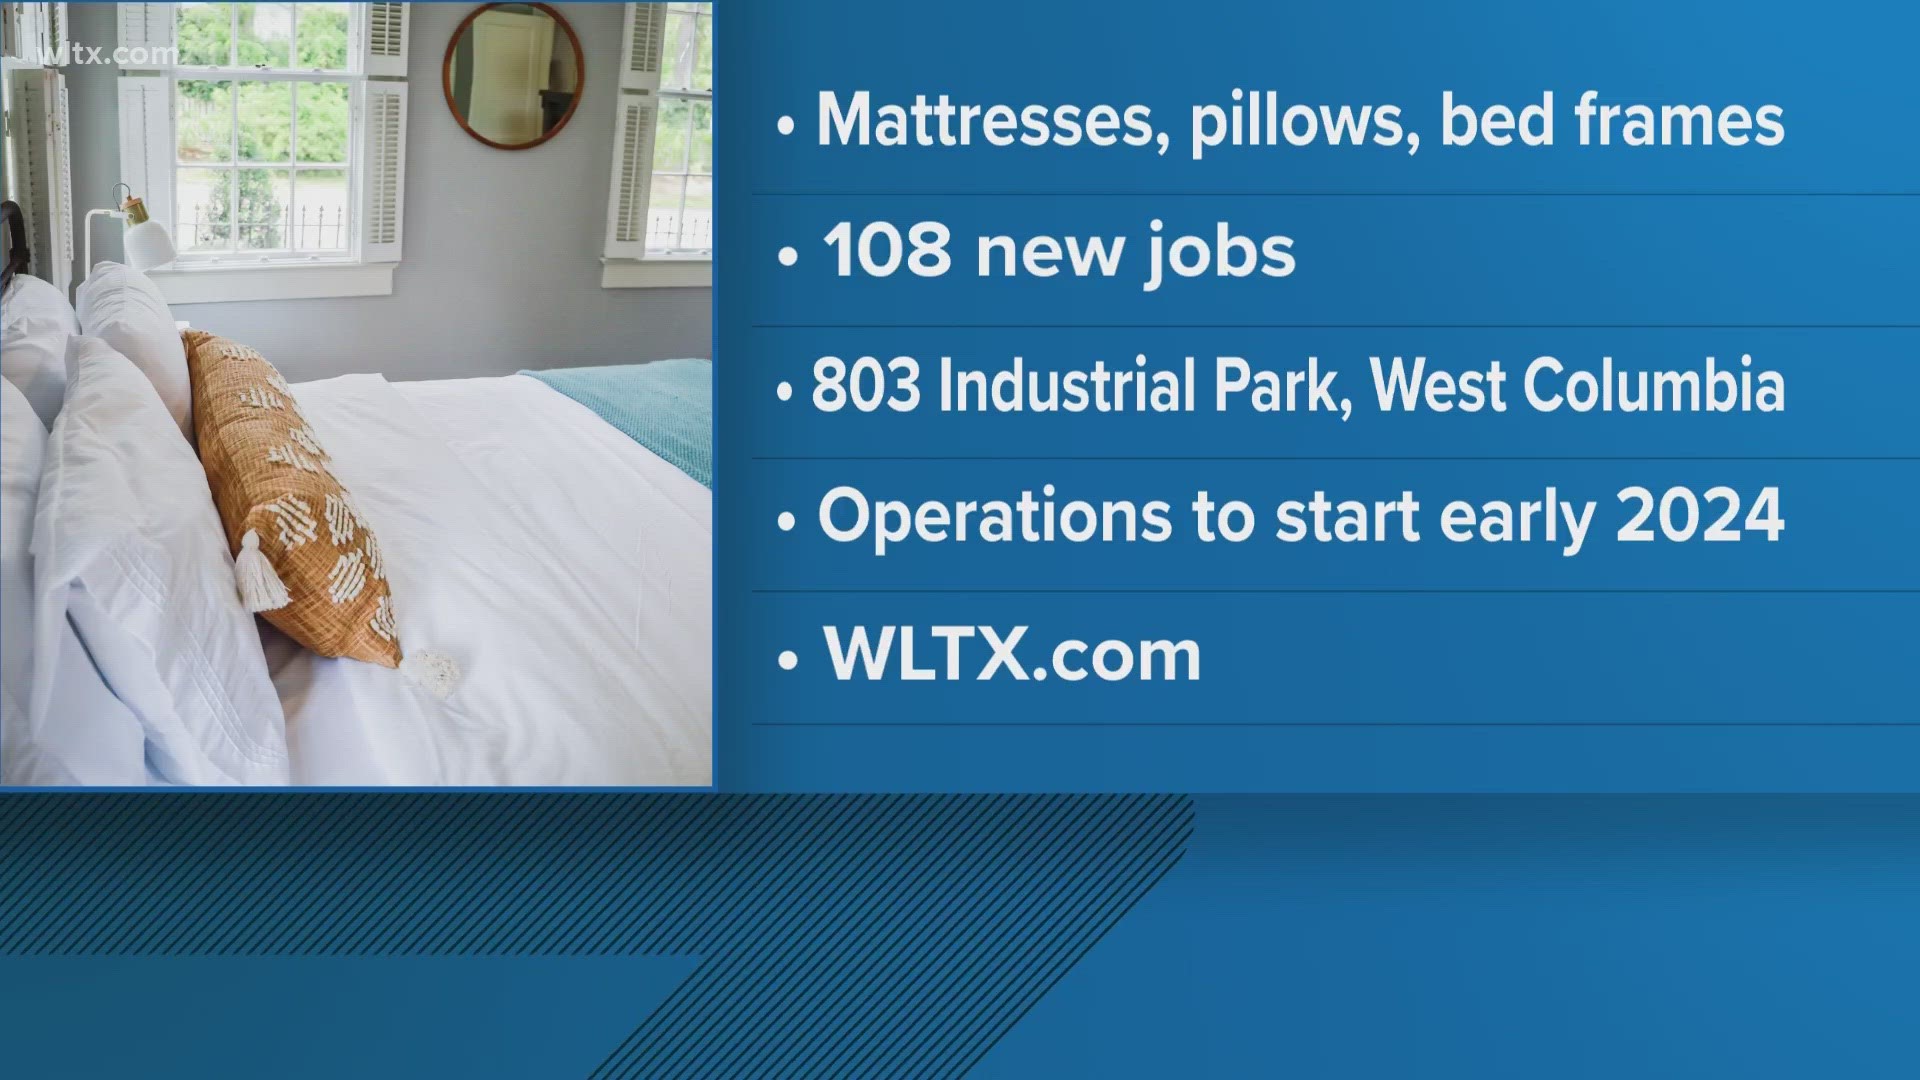 Mattress Warehouse will be locating a new distribution center at 803 Industrial Park in West Columbia.